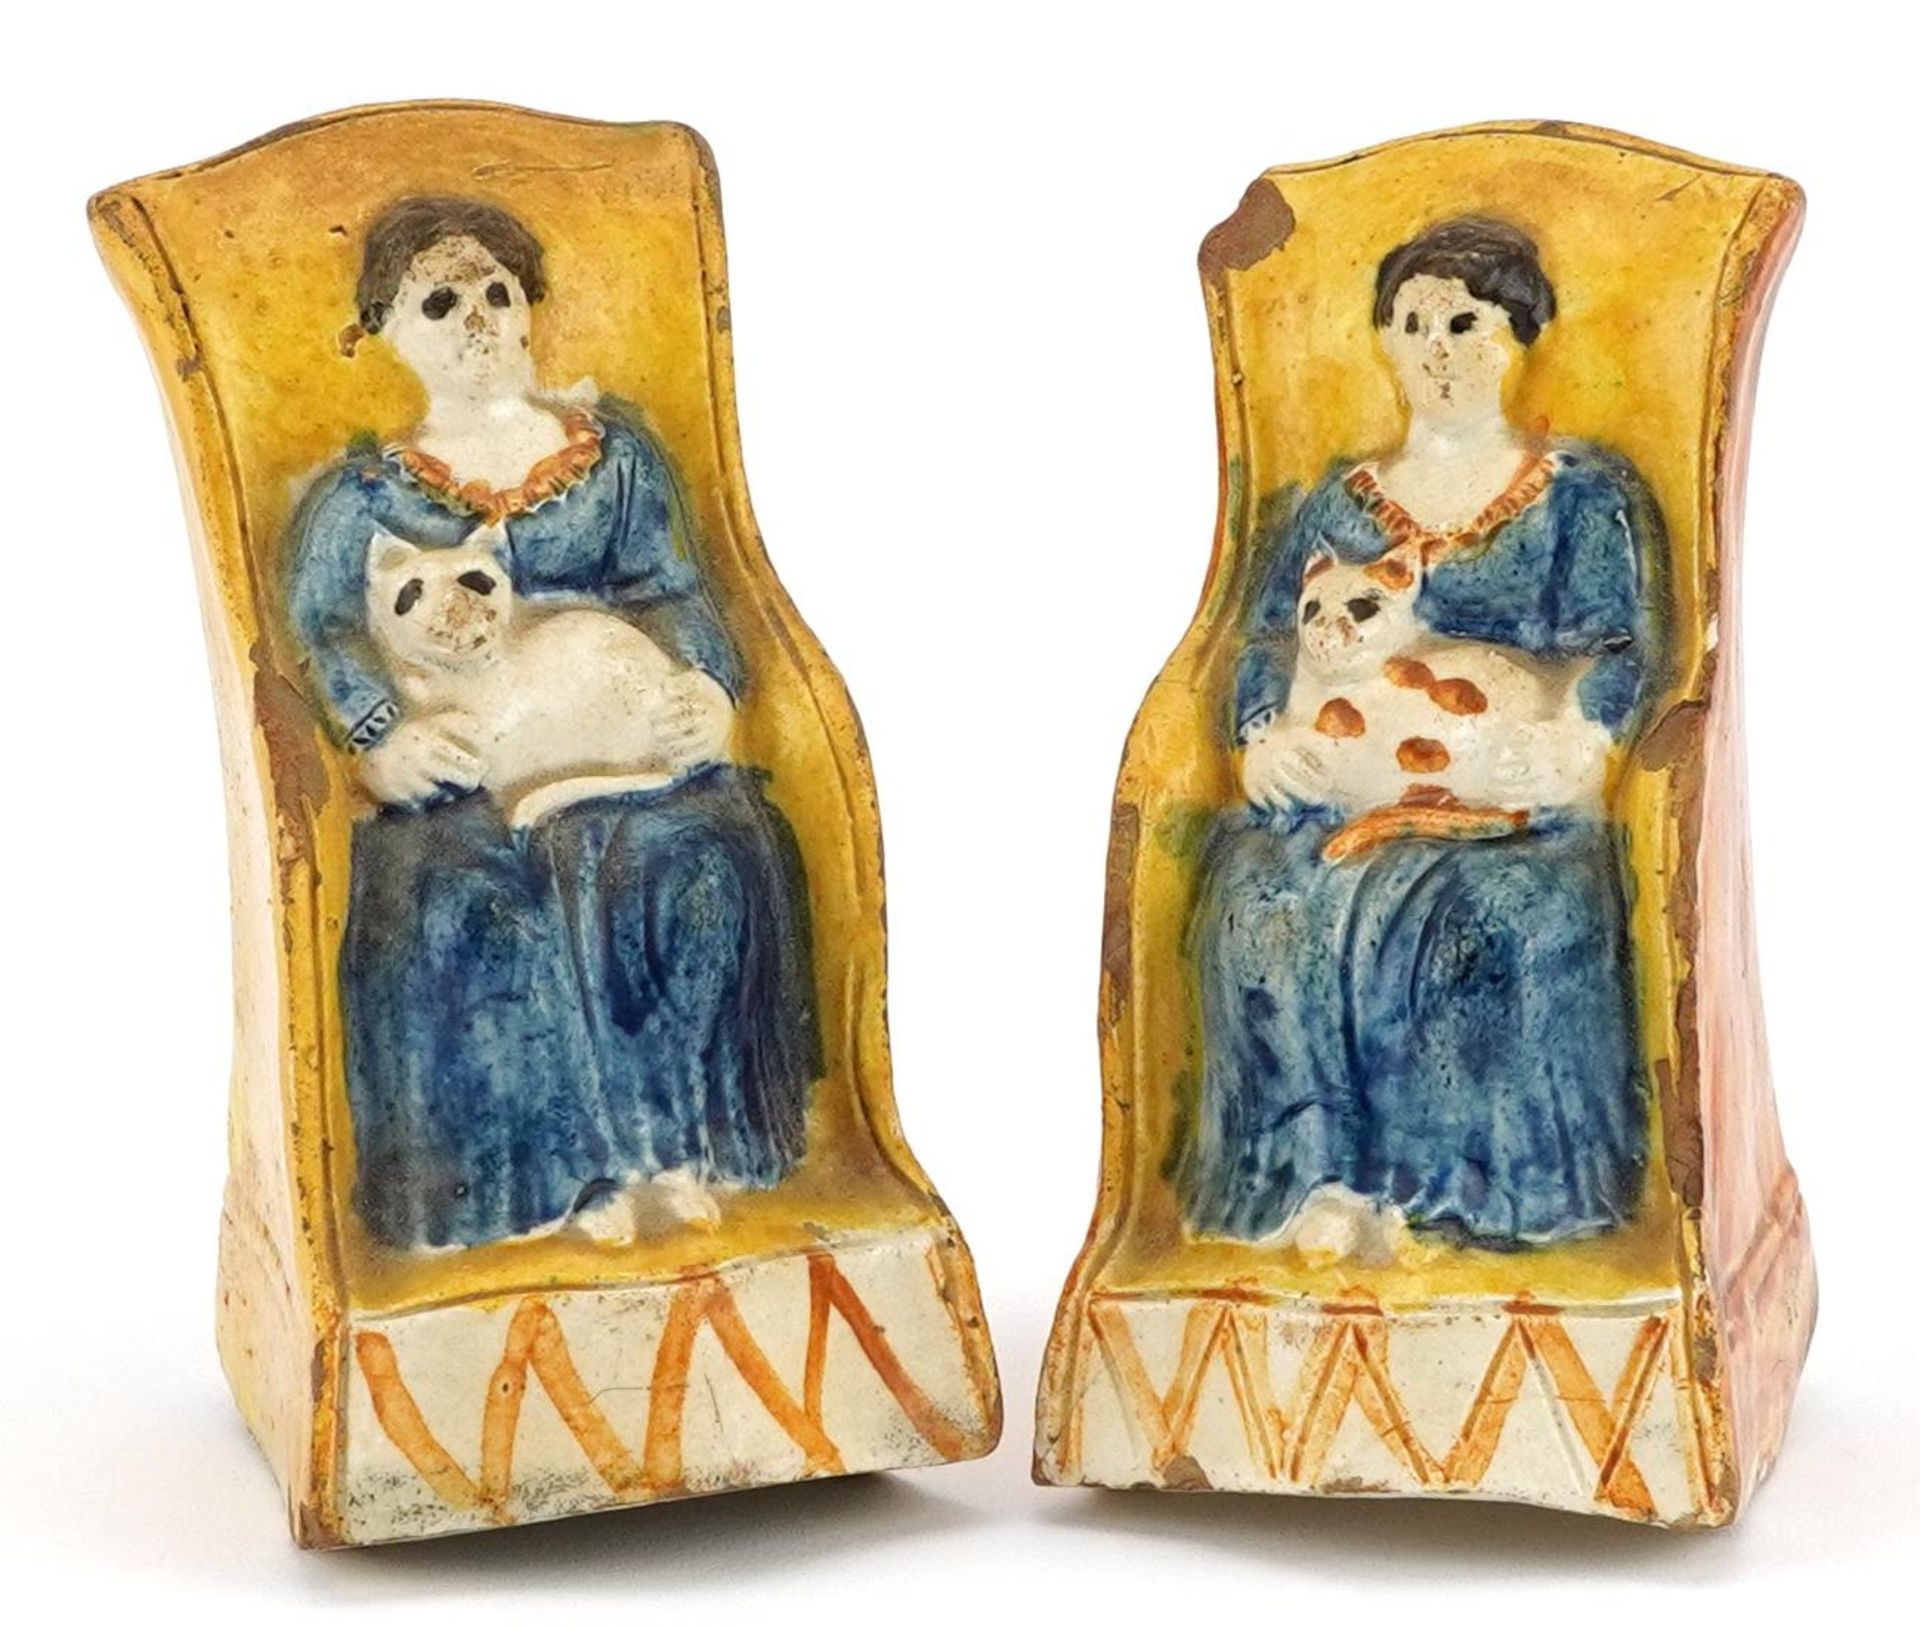 Pair of 19th century Staffordshire pottery rocking figures, each in the form of a female holding a